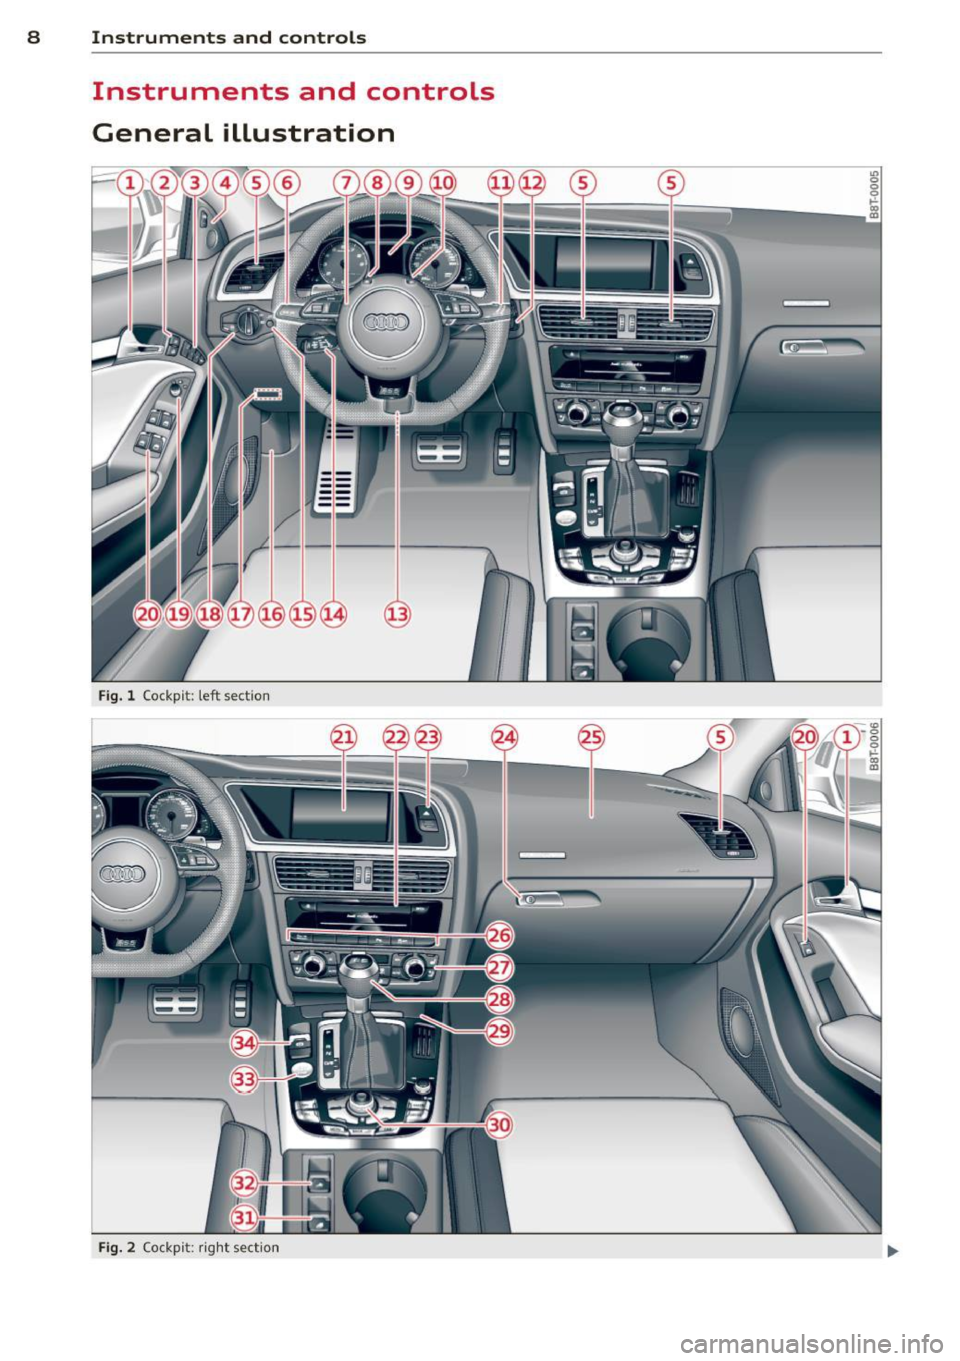 AUDI RS5 CABRIOLET 2013  Owners Manual 8  Instruments and controls 
Instruments  and  controls 
General  illustration 
Fig. l Cockp it:  left  sect io n 
Fig. 2 Co ck pi t: ri ght  sect io n  